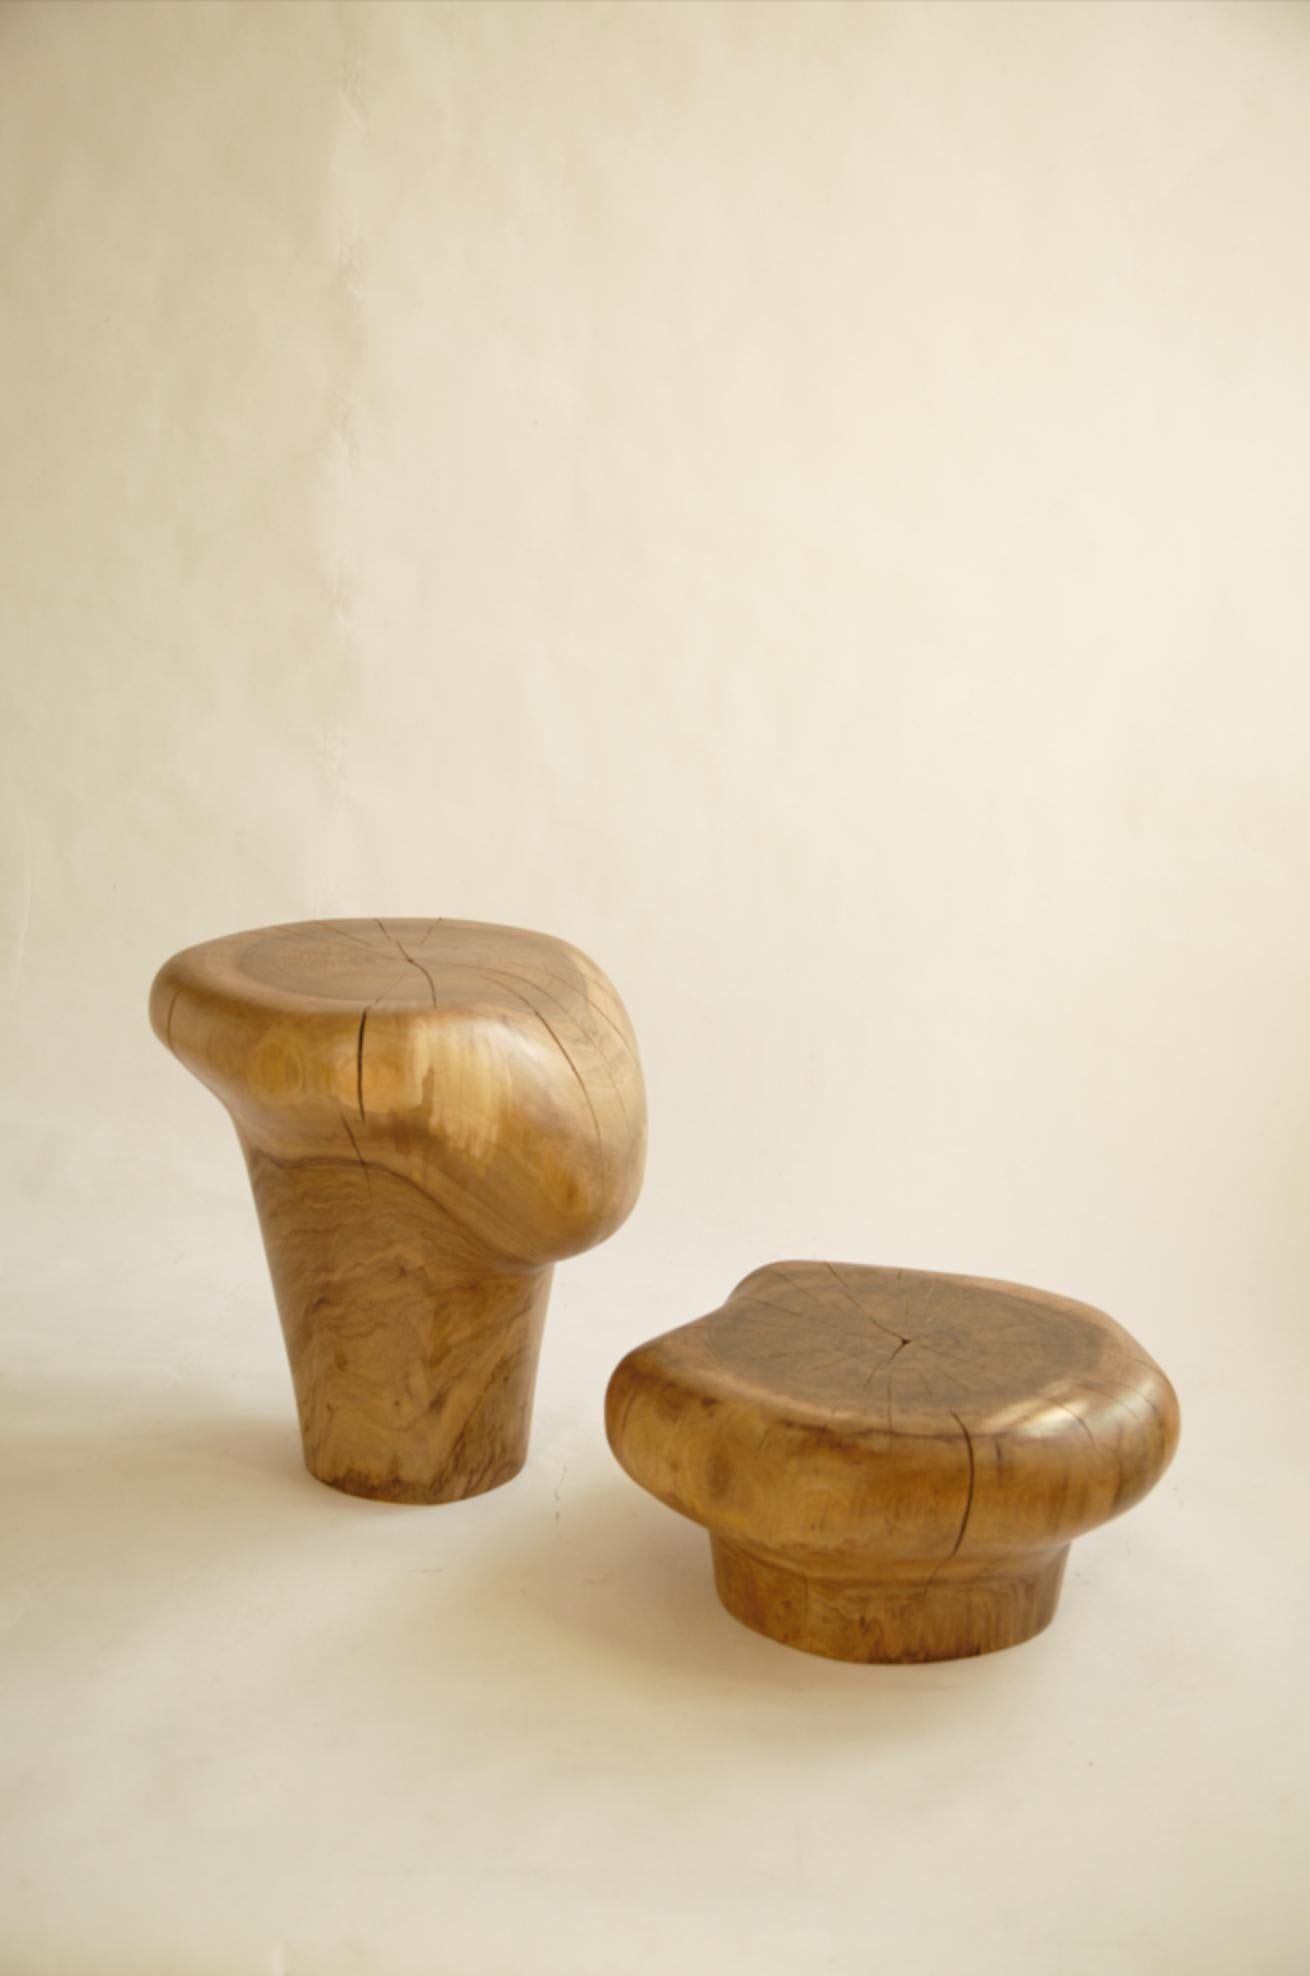 Pok stool 6 by Antoine Maurice
Dimensions: D 30 x H 50 cm
Materials: Walnut

Born in 1992, Antoine Maurice lives and works in Yvelines.
He trained in drawing at an art school and then in woodworking at the furniture school in Paris, La Bonne